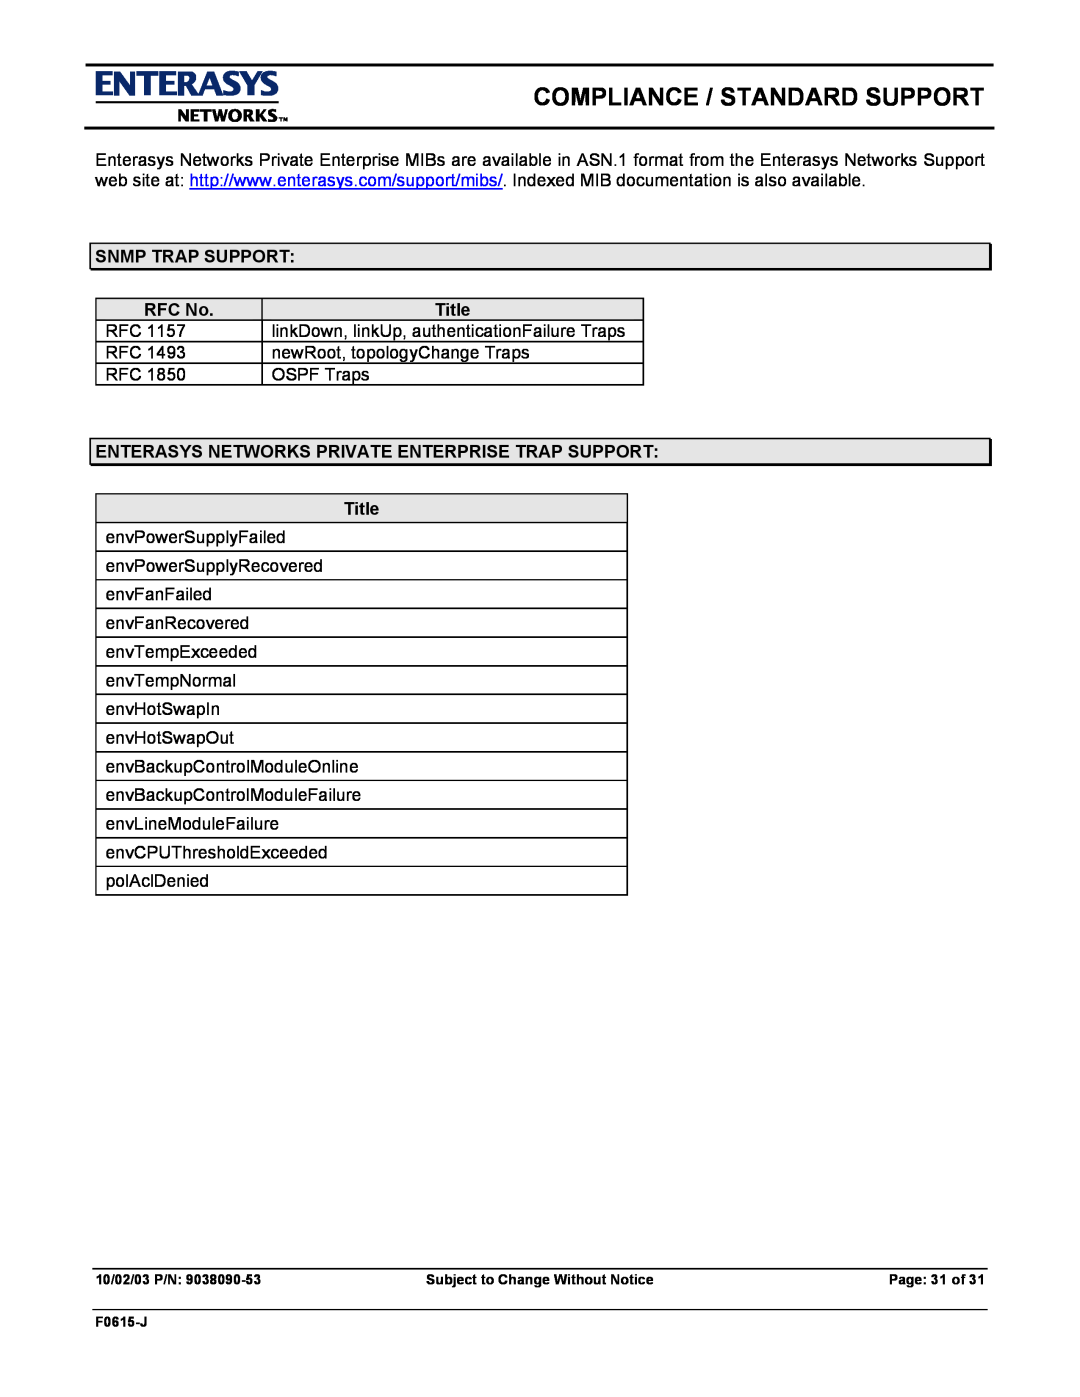 Enterasys Networks E9.1.7.0 manual Compliance / Standard Support, Page 31 of 